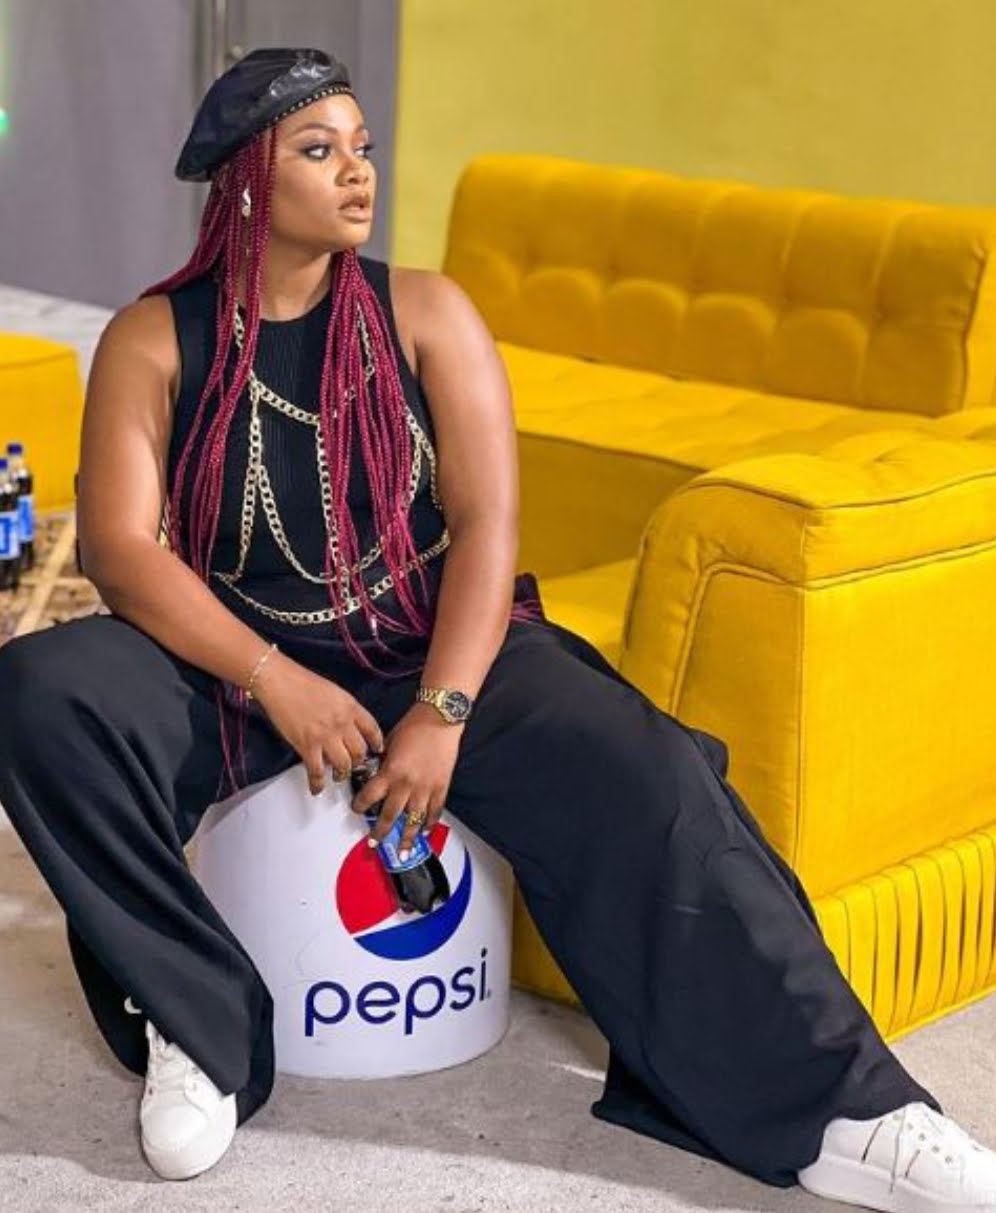 Tega invites Pere on IG to clarify issues about her ‘private’ smelling like fish (Video)